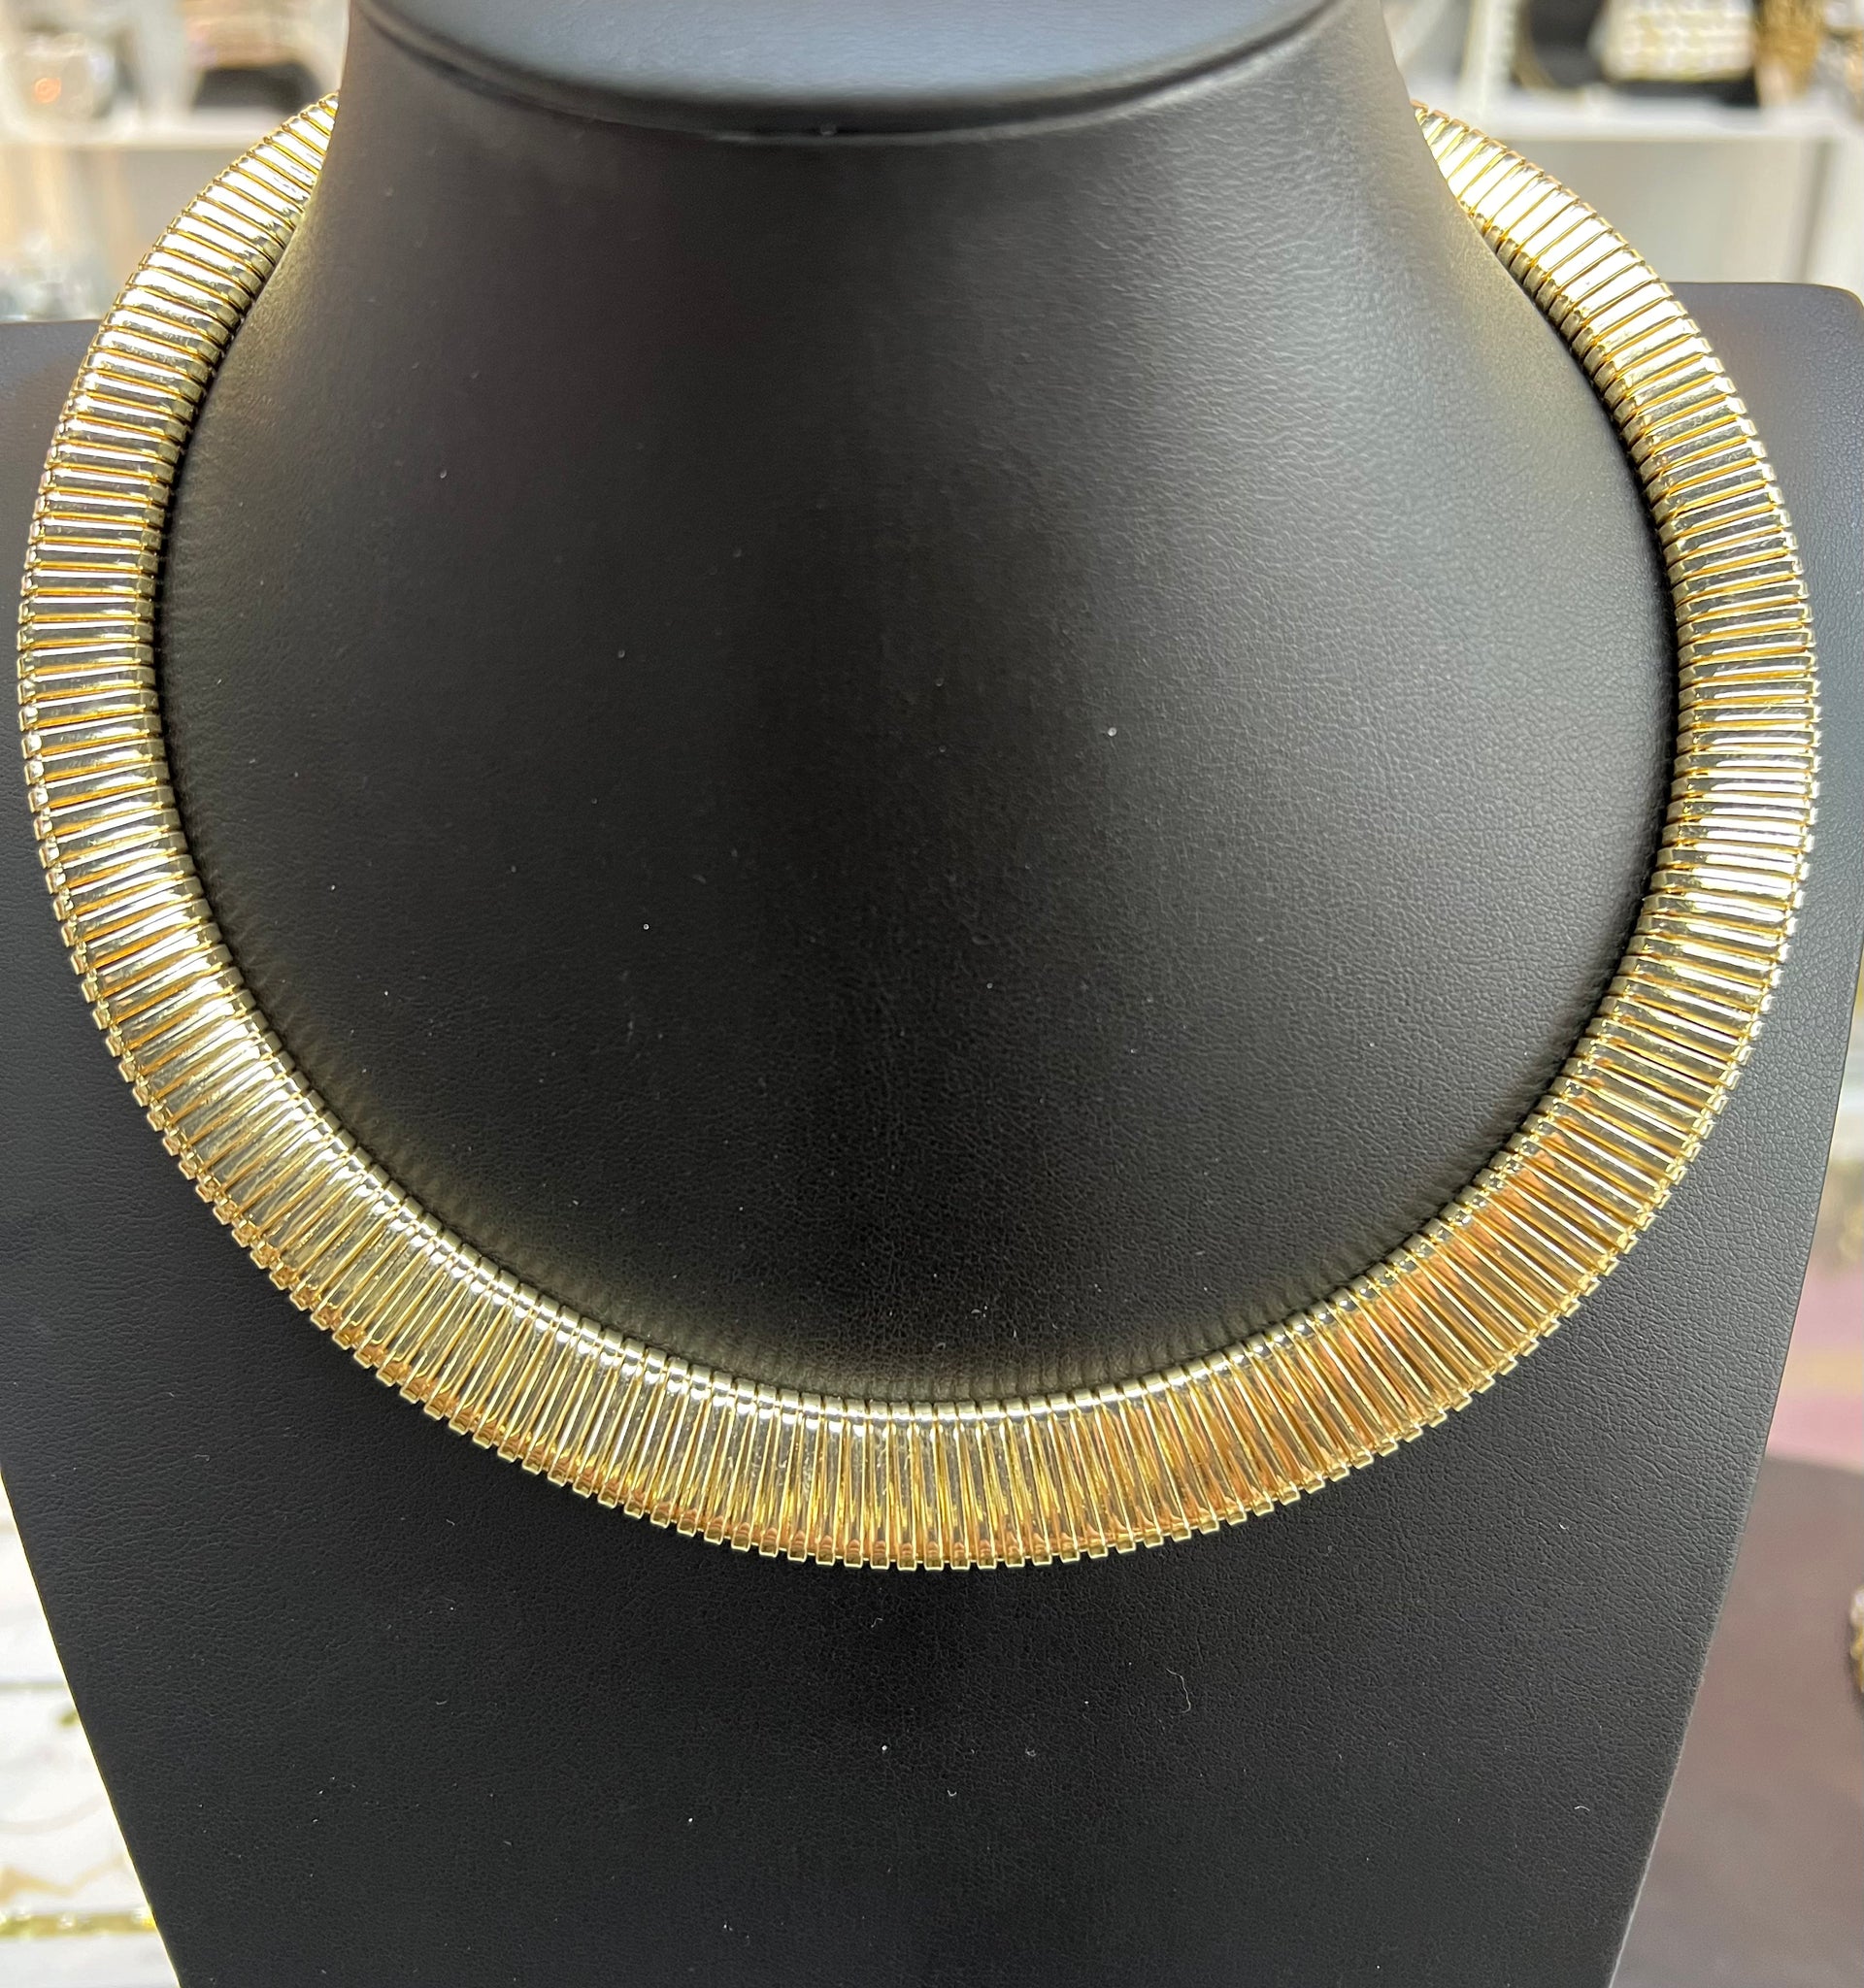 Gold Coil Necklace